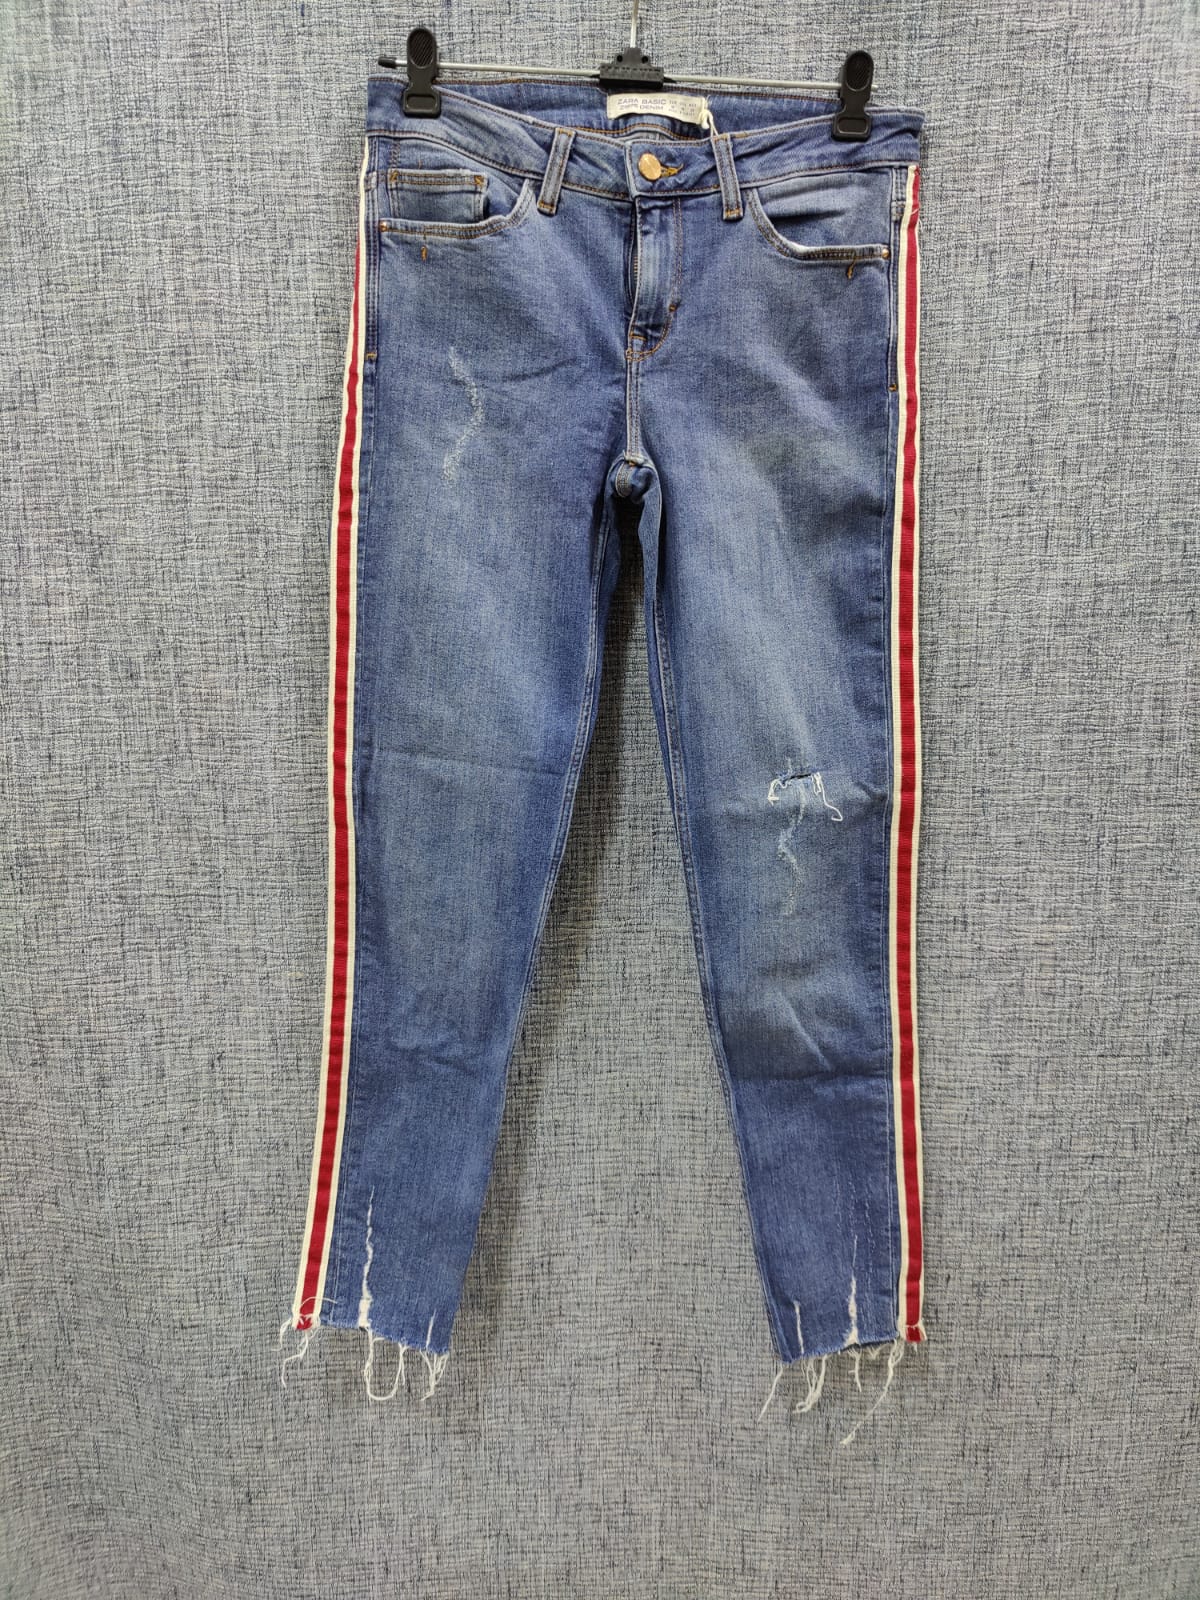 ZARA Blue Denim Jeans with Red Tape | Relove